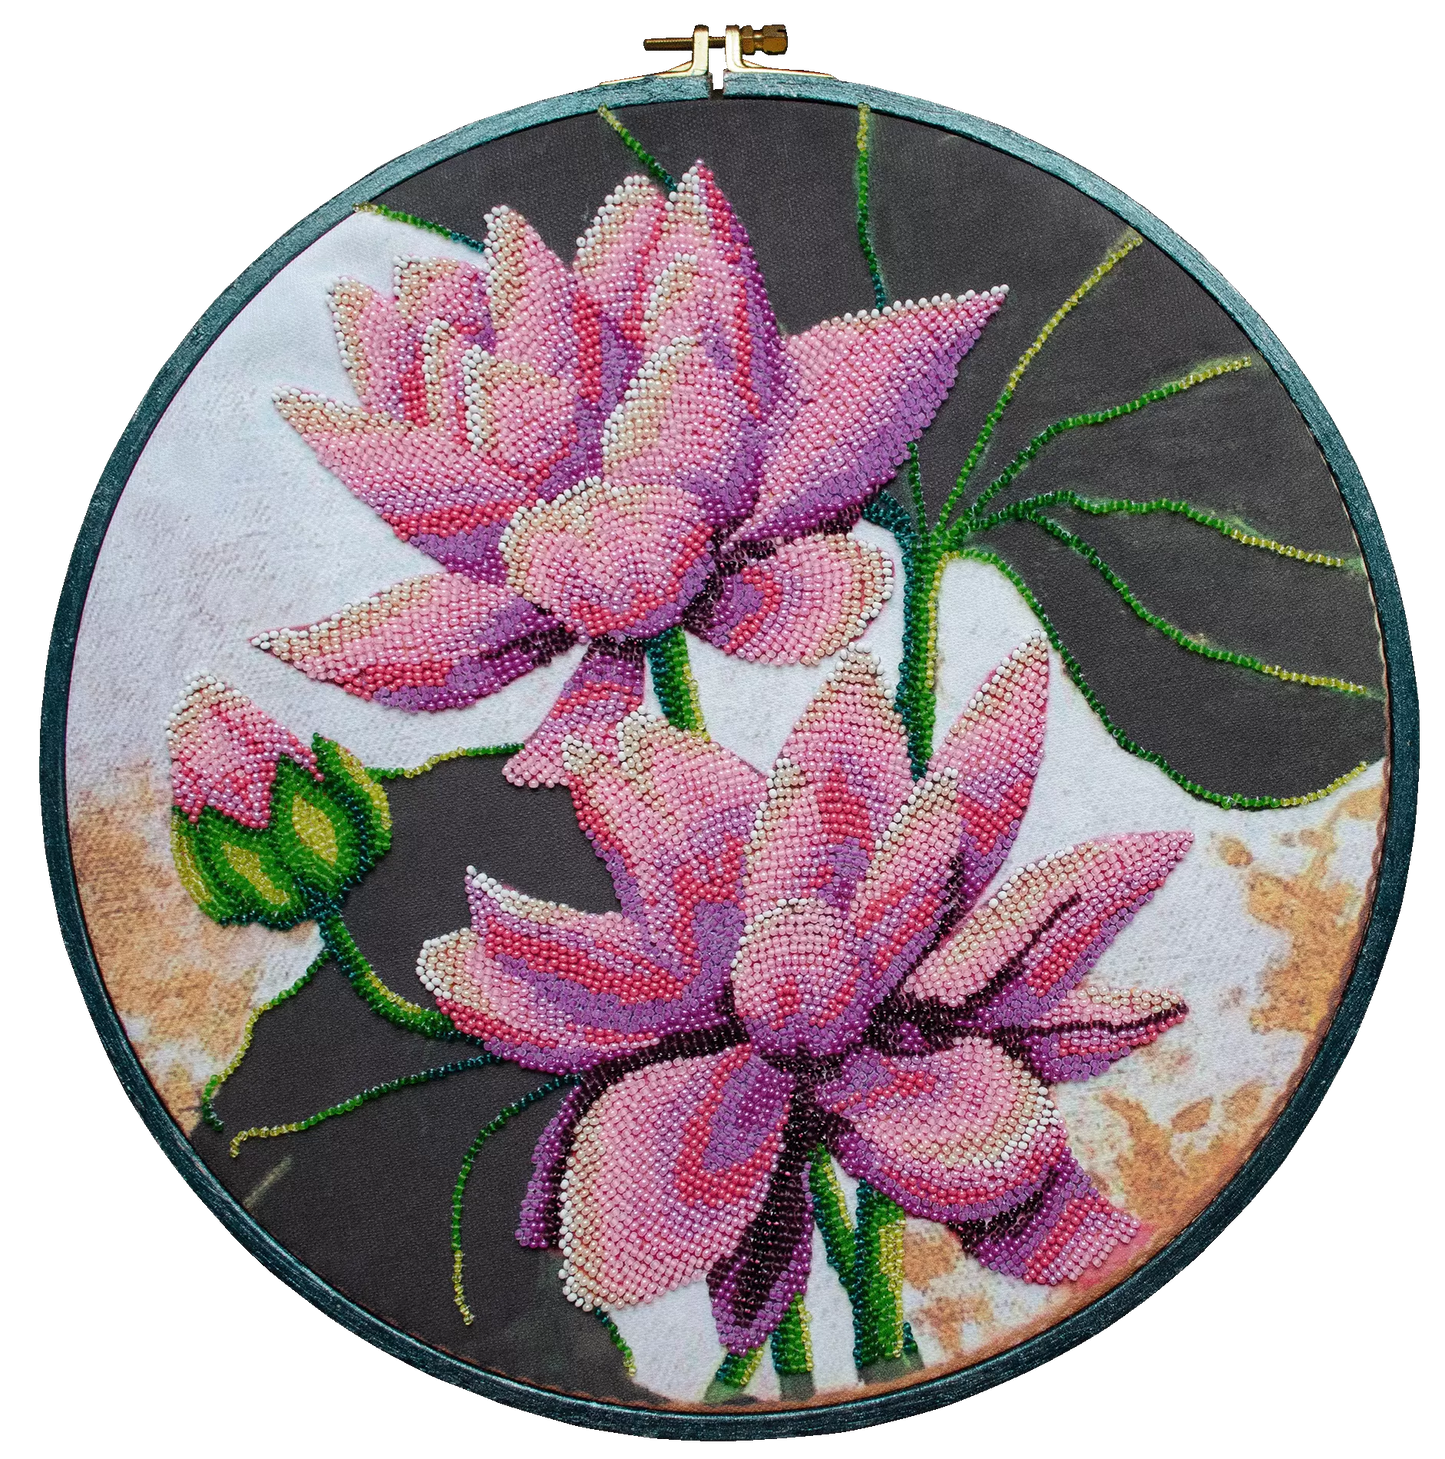 Bead embroidery kit Blooming lotus - Flowers Size: 12.6"×12.6" (32×32 cm)